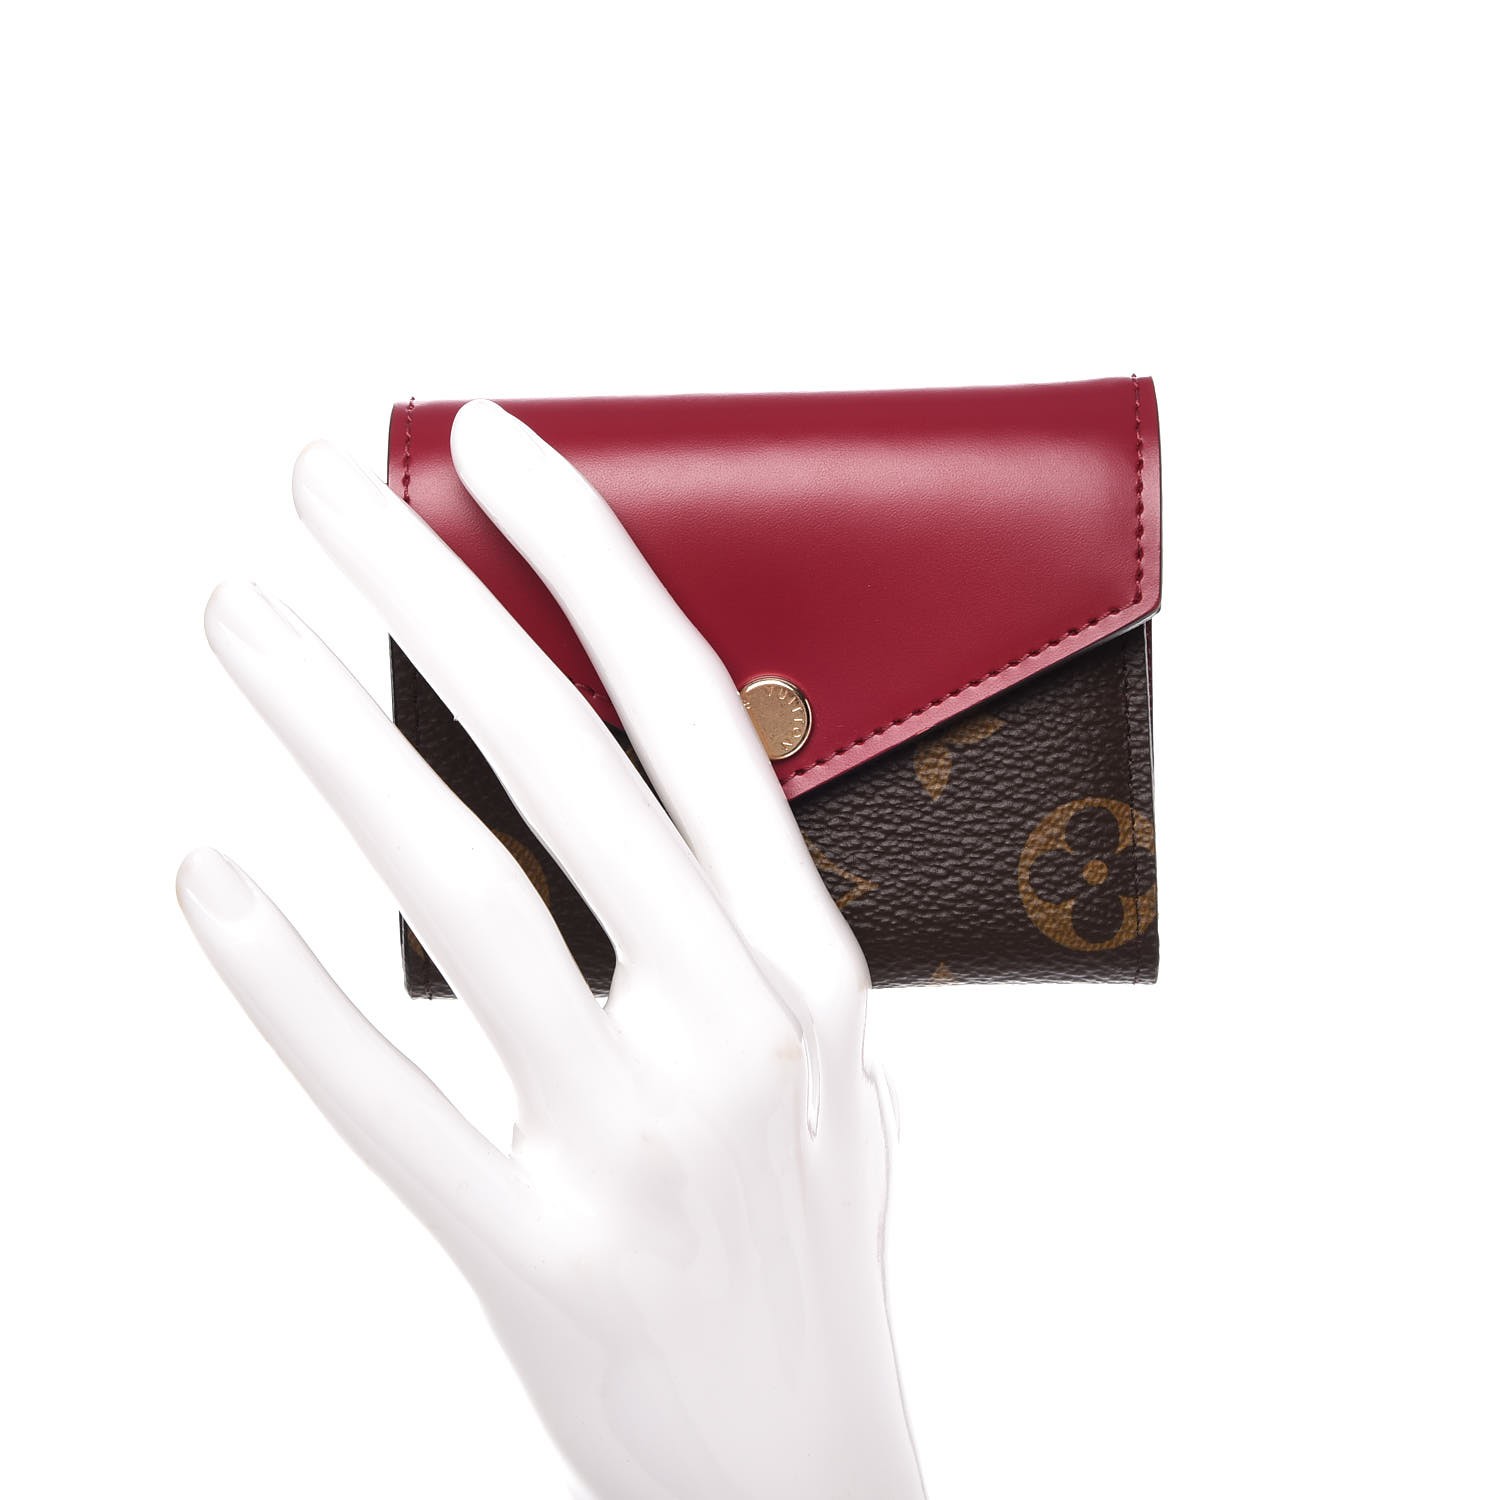 Buy Online Louis Vuitton-MONO ZOE WALLET-M62933 at Affordable Price